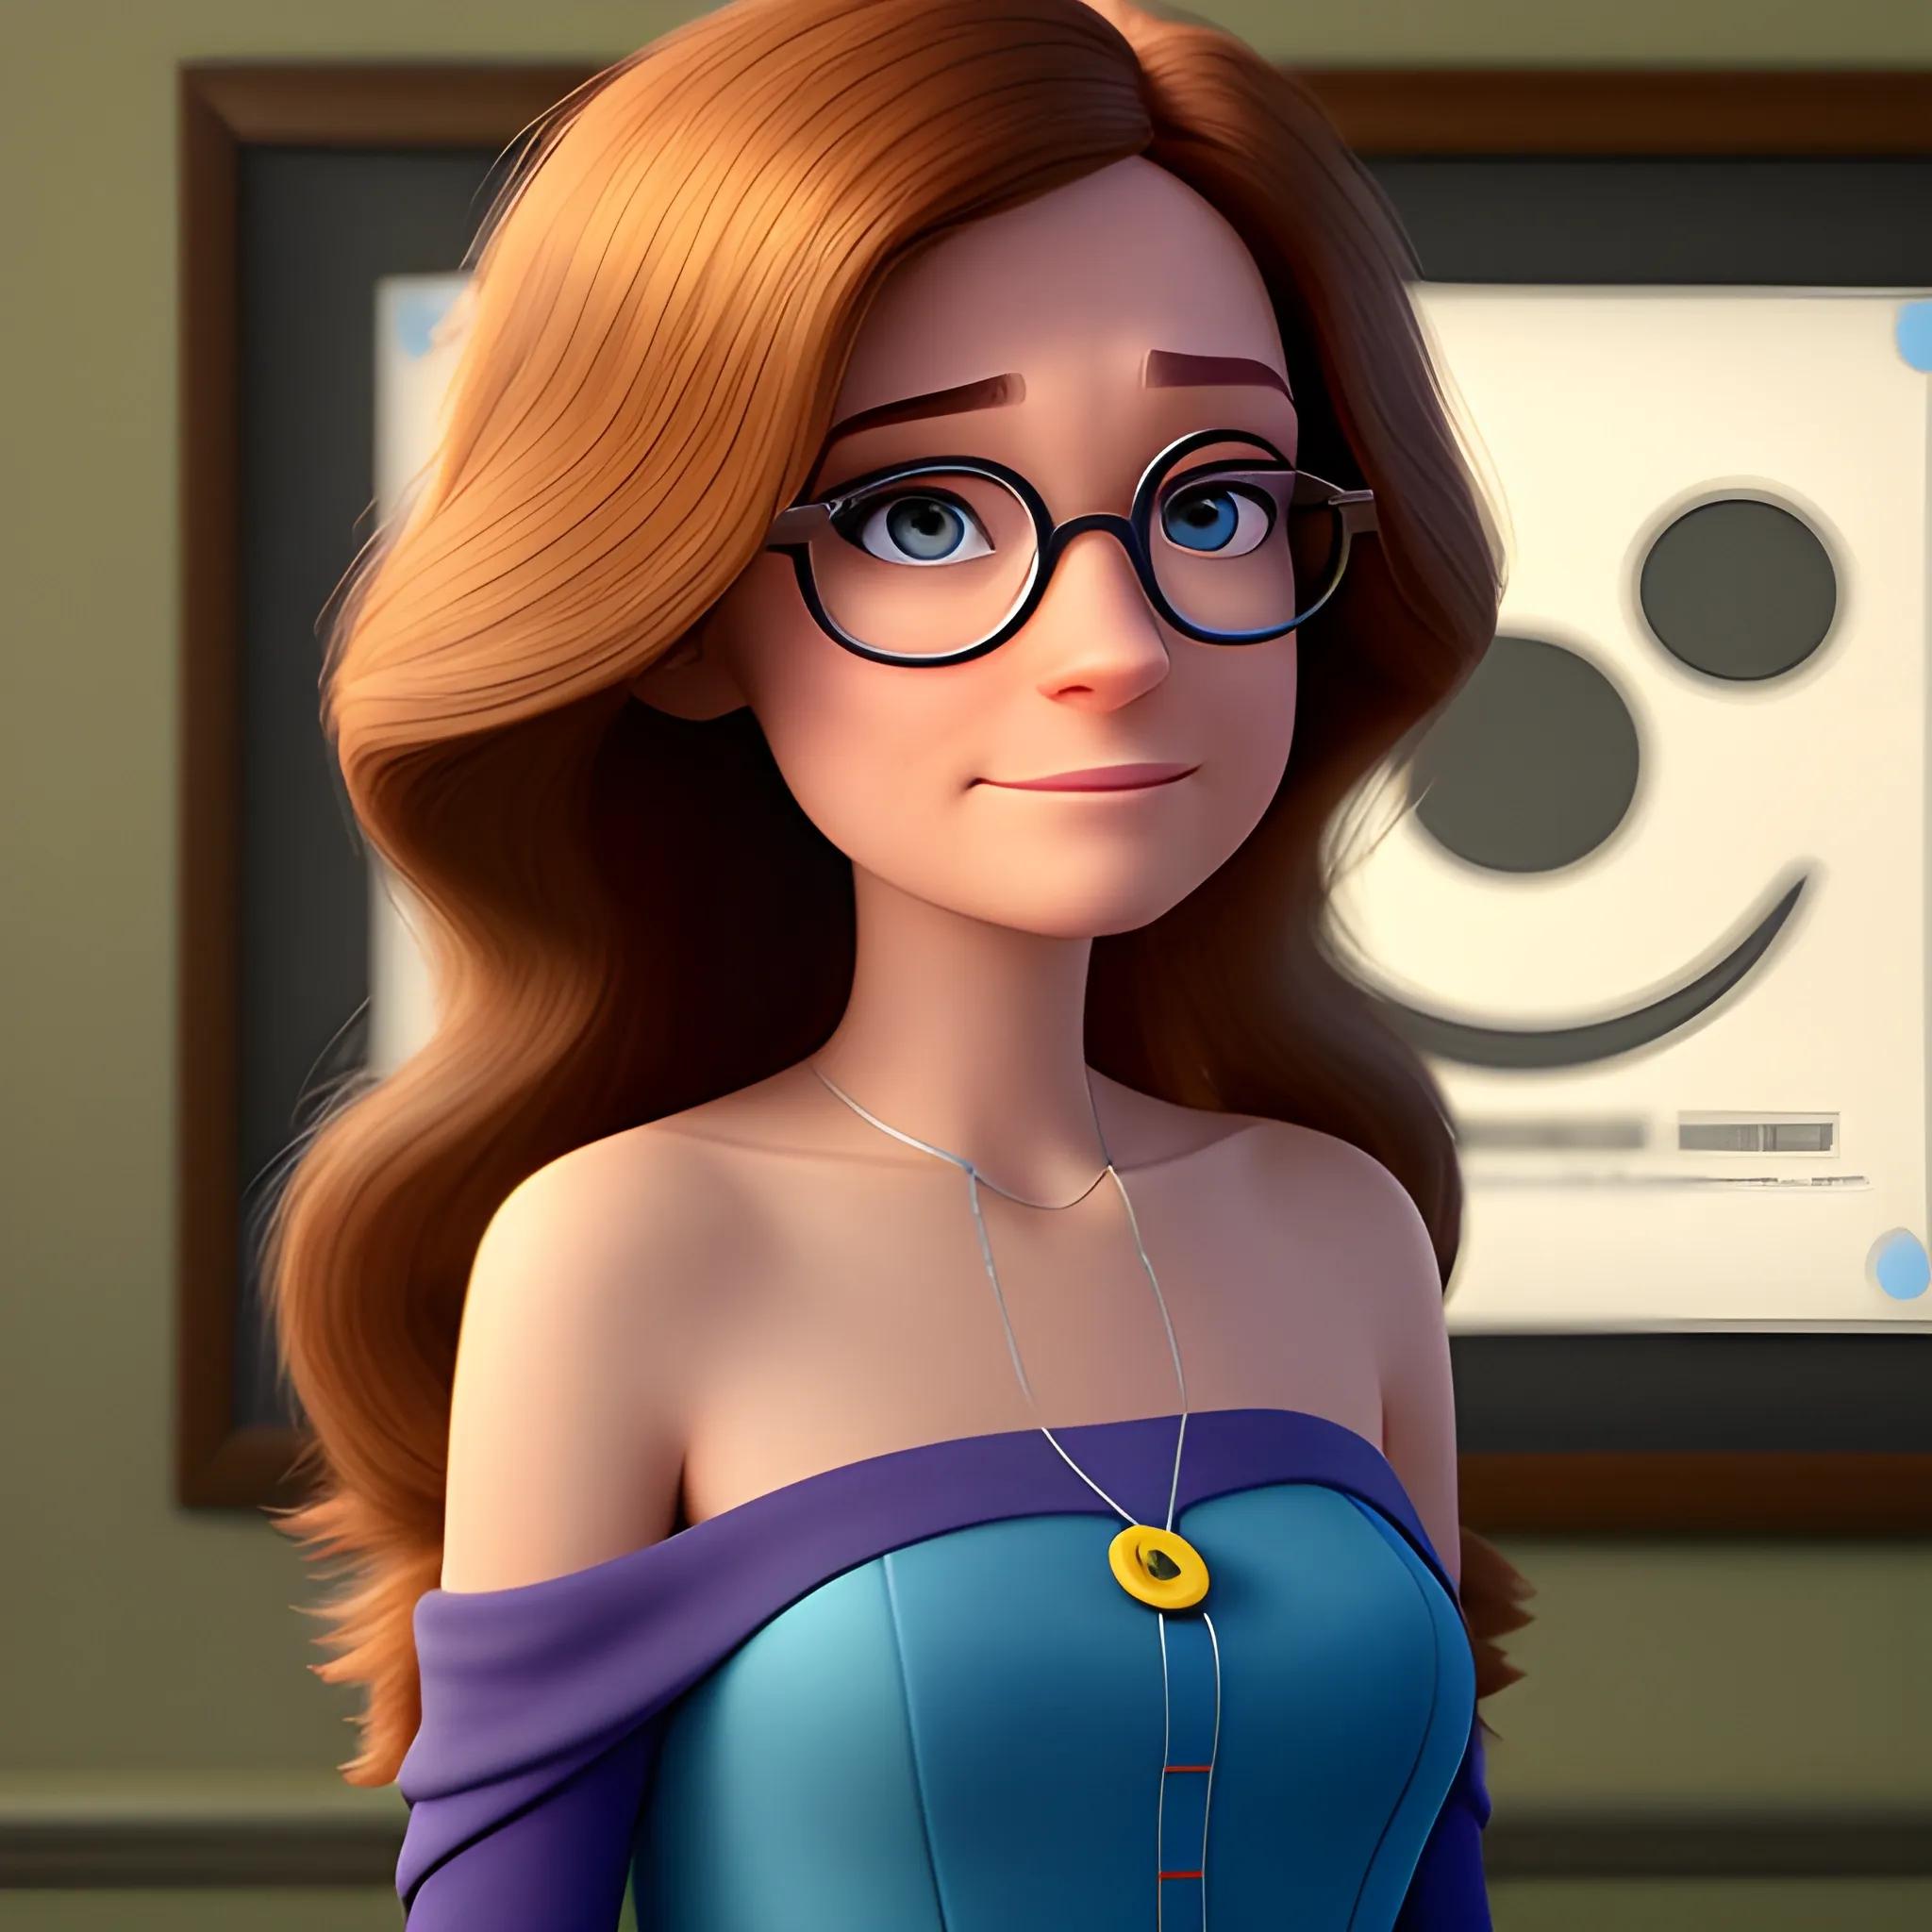 a Disney Pixar Studios character, a woman with shoulder-length hair, wearing glasses, 3D